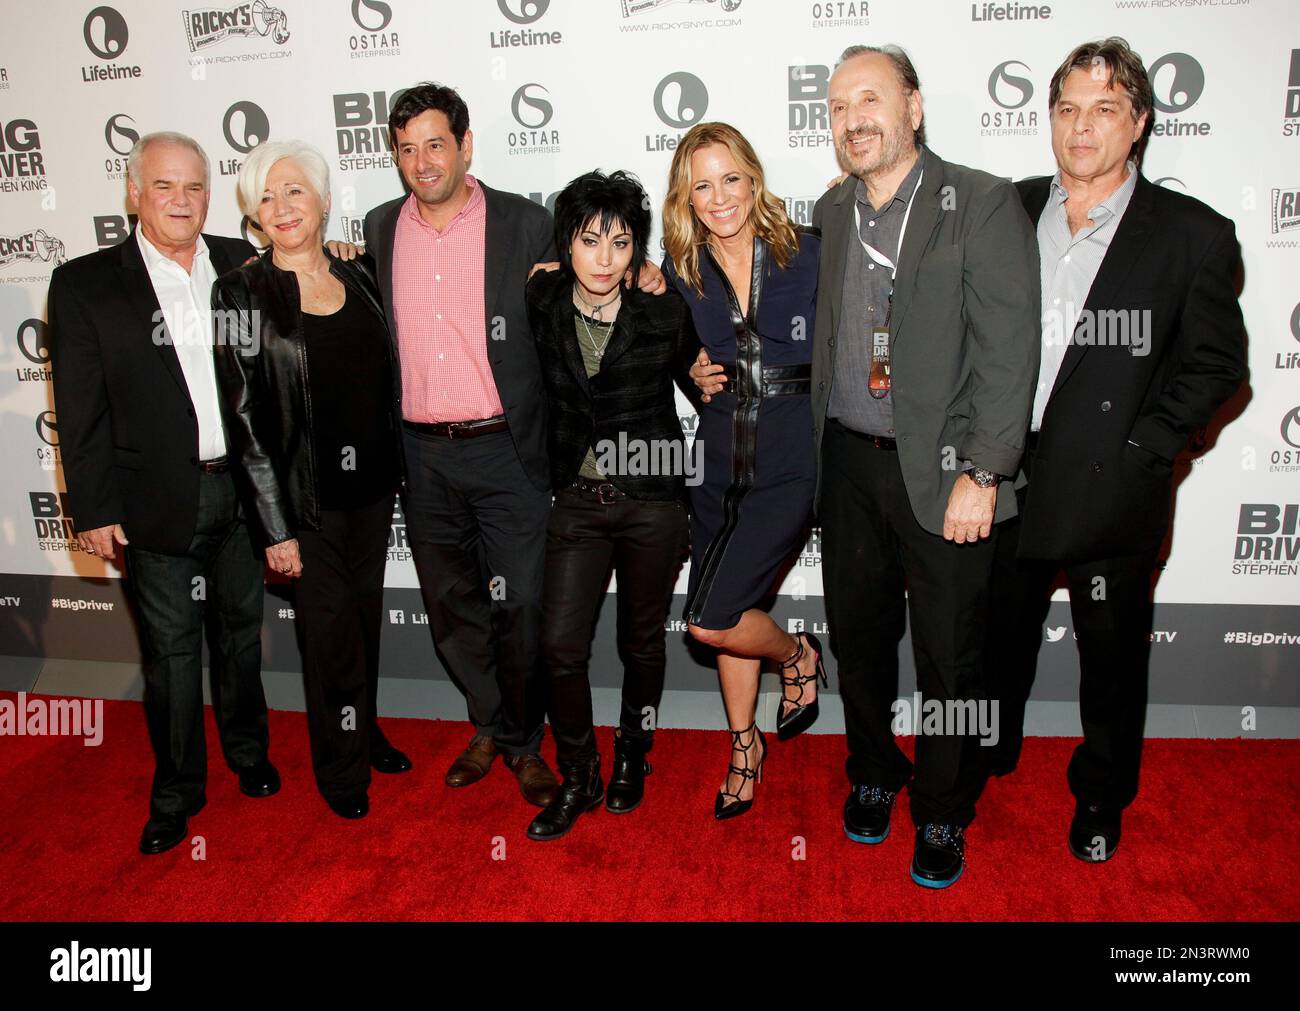 Jeffrey Hayes, from left, Olympia Dukakis, Executive Vice President and  General Manager of Lifetime Rob Sharenow, Joan Jett, Maria Bello, Mikael  Salomon and Richard Matheson attend a screening of Lifetime's "Big Driver"